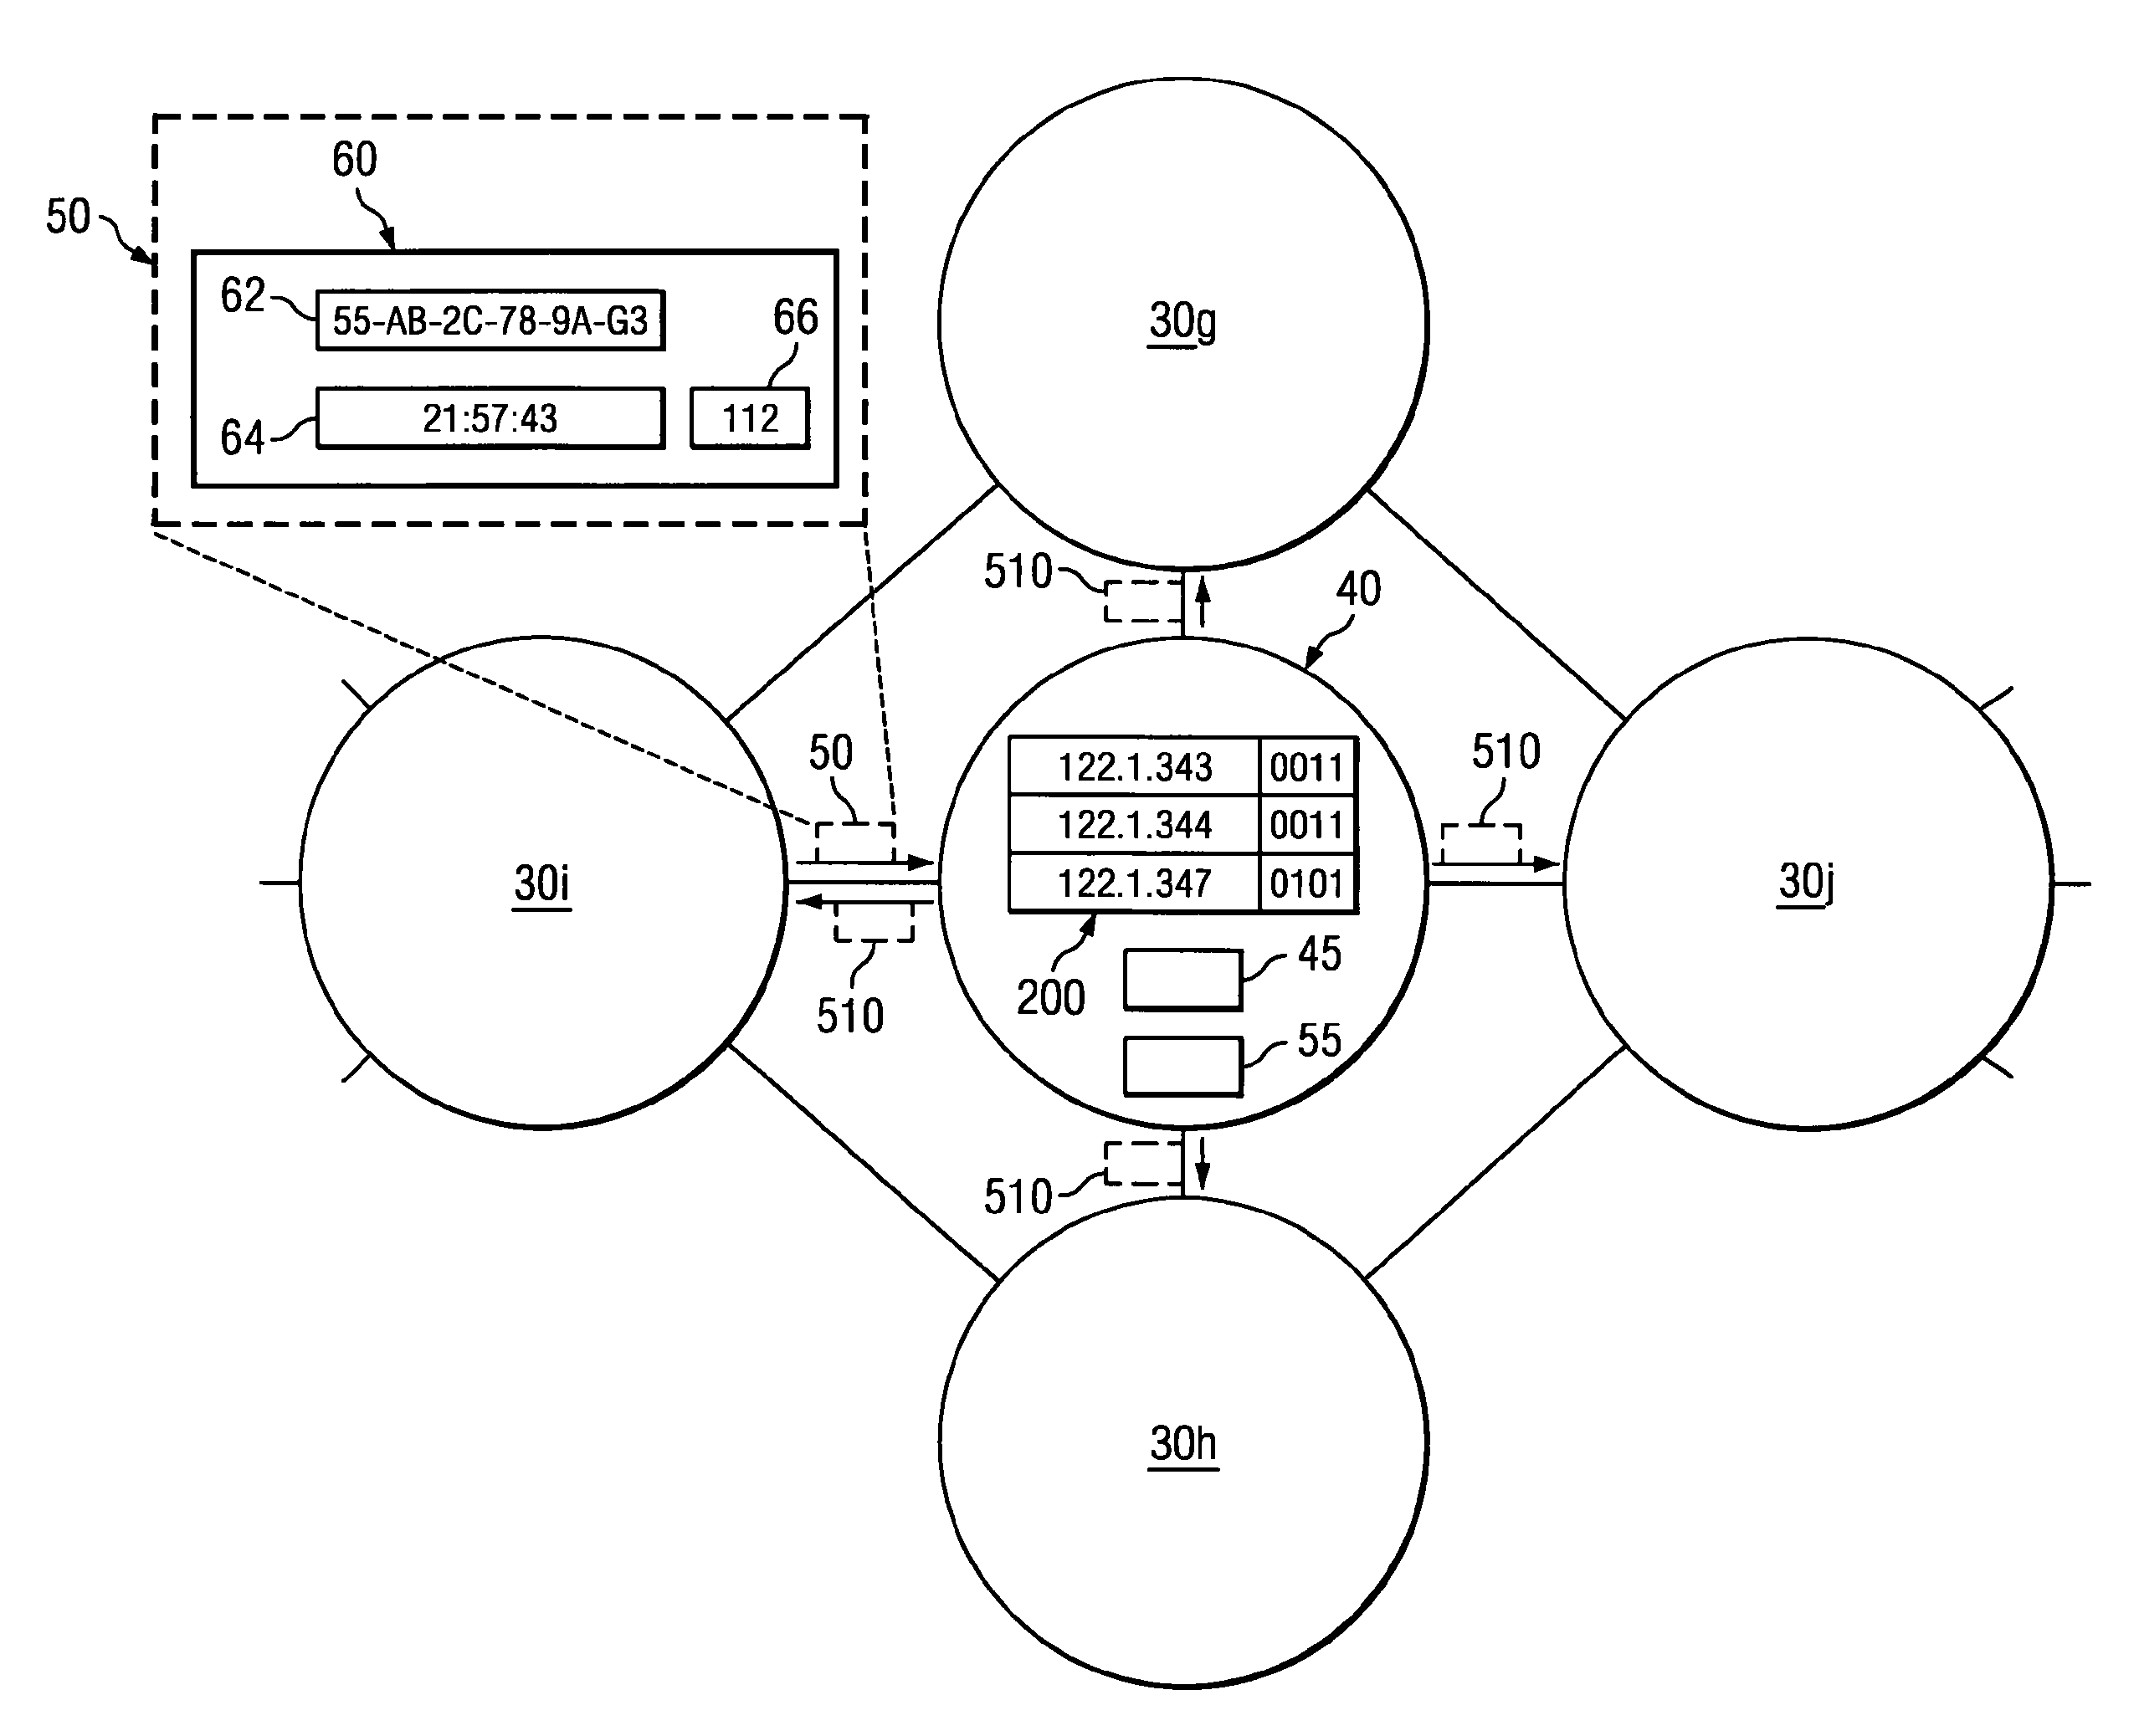 System and method for distributed IP telephony tracking